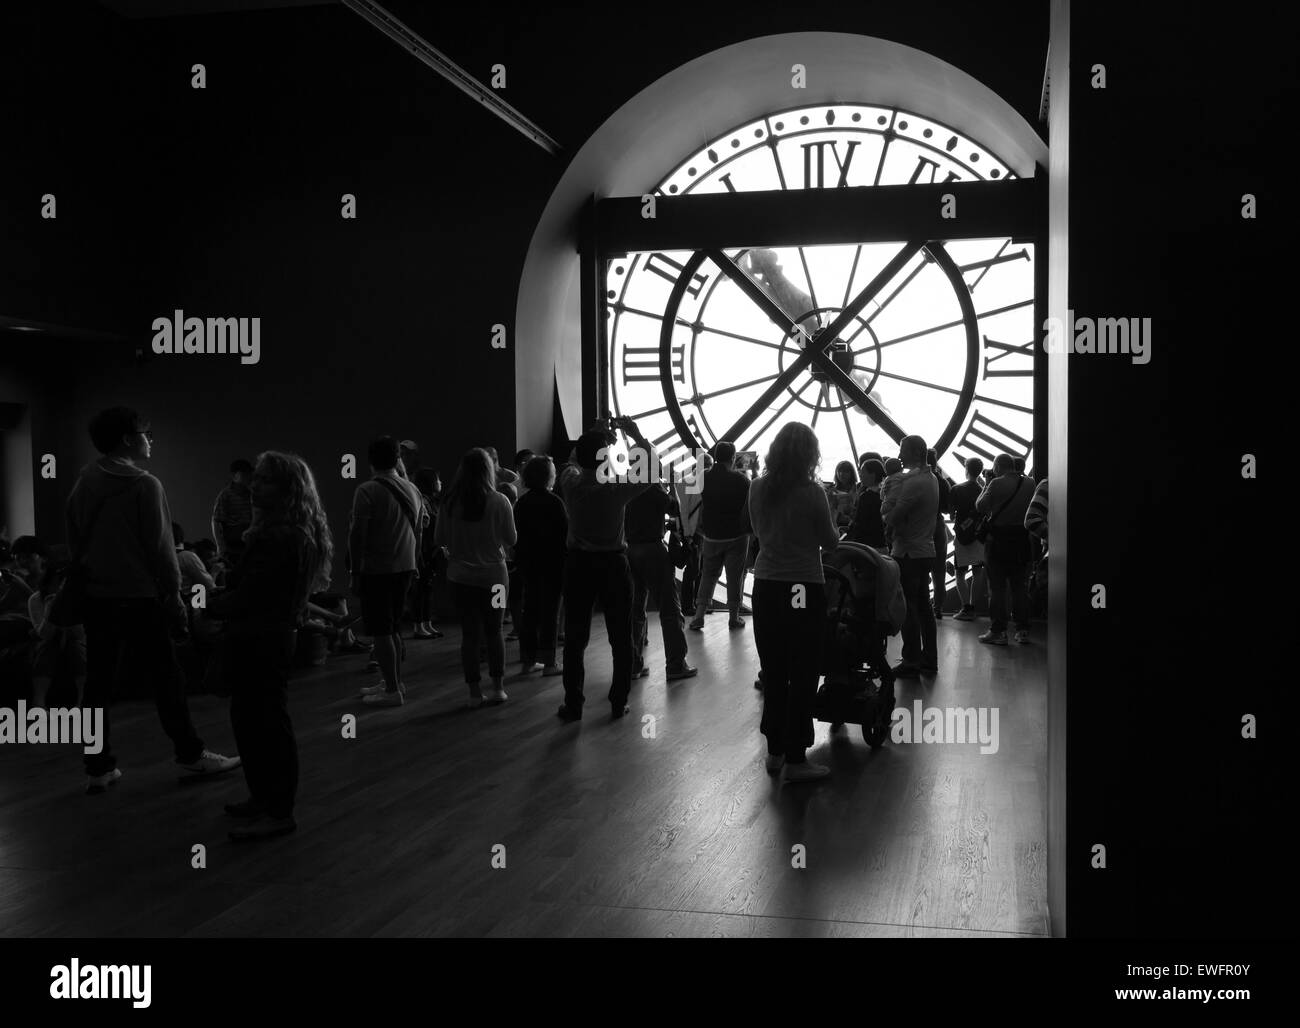 Paris, France - August 10, 2014: Tourists and visitors near the famous ancient clock window in Orsay Museum, black and white pho Stock Photo